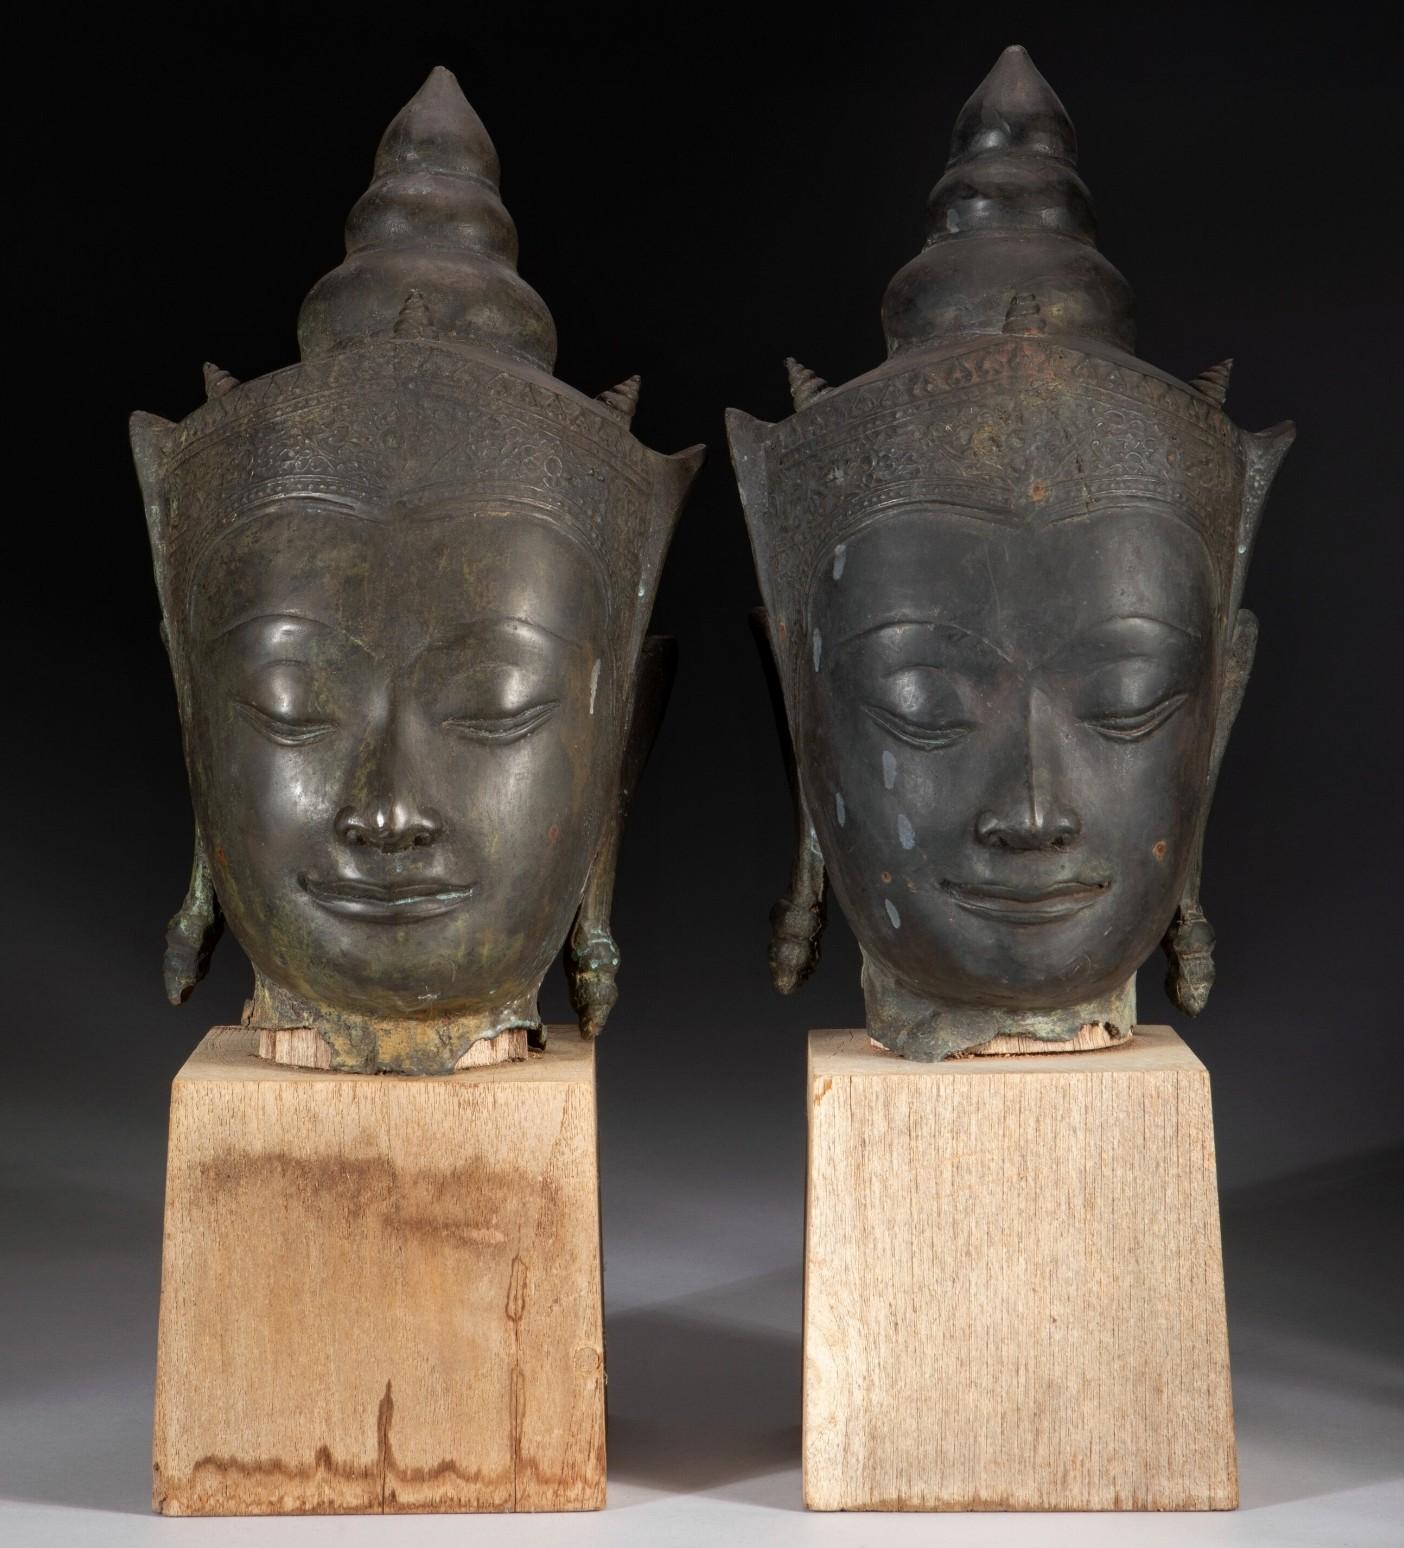 A remarkable pair of Thai Ayutthaya period bronze crowned Buddha mounted on wood display stands. Thailand. 17th/18th Century 

Dimensions: (approx)
Head: 15